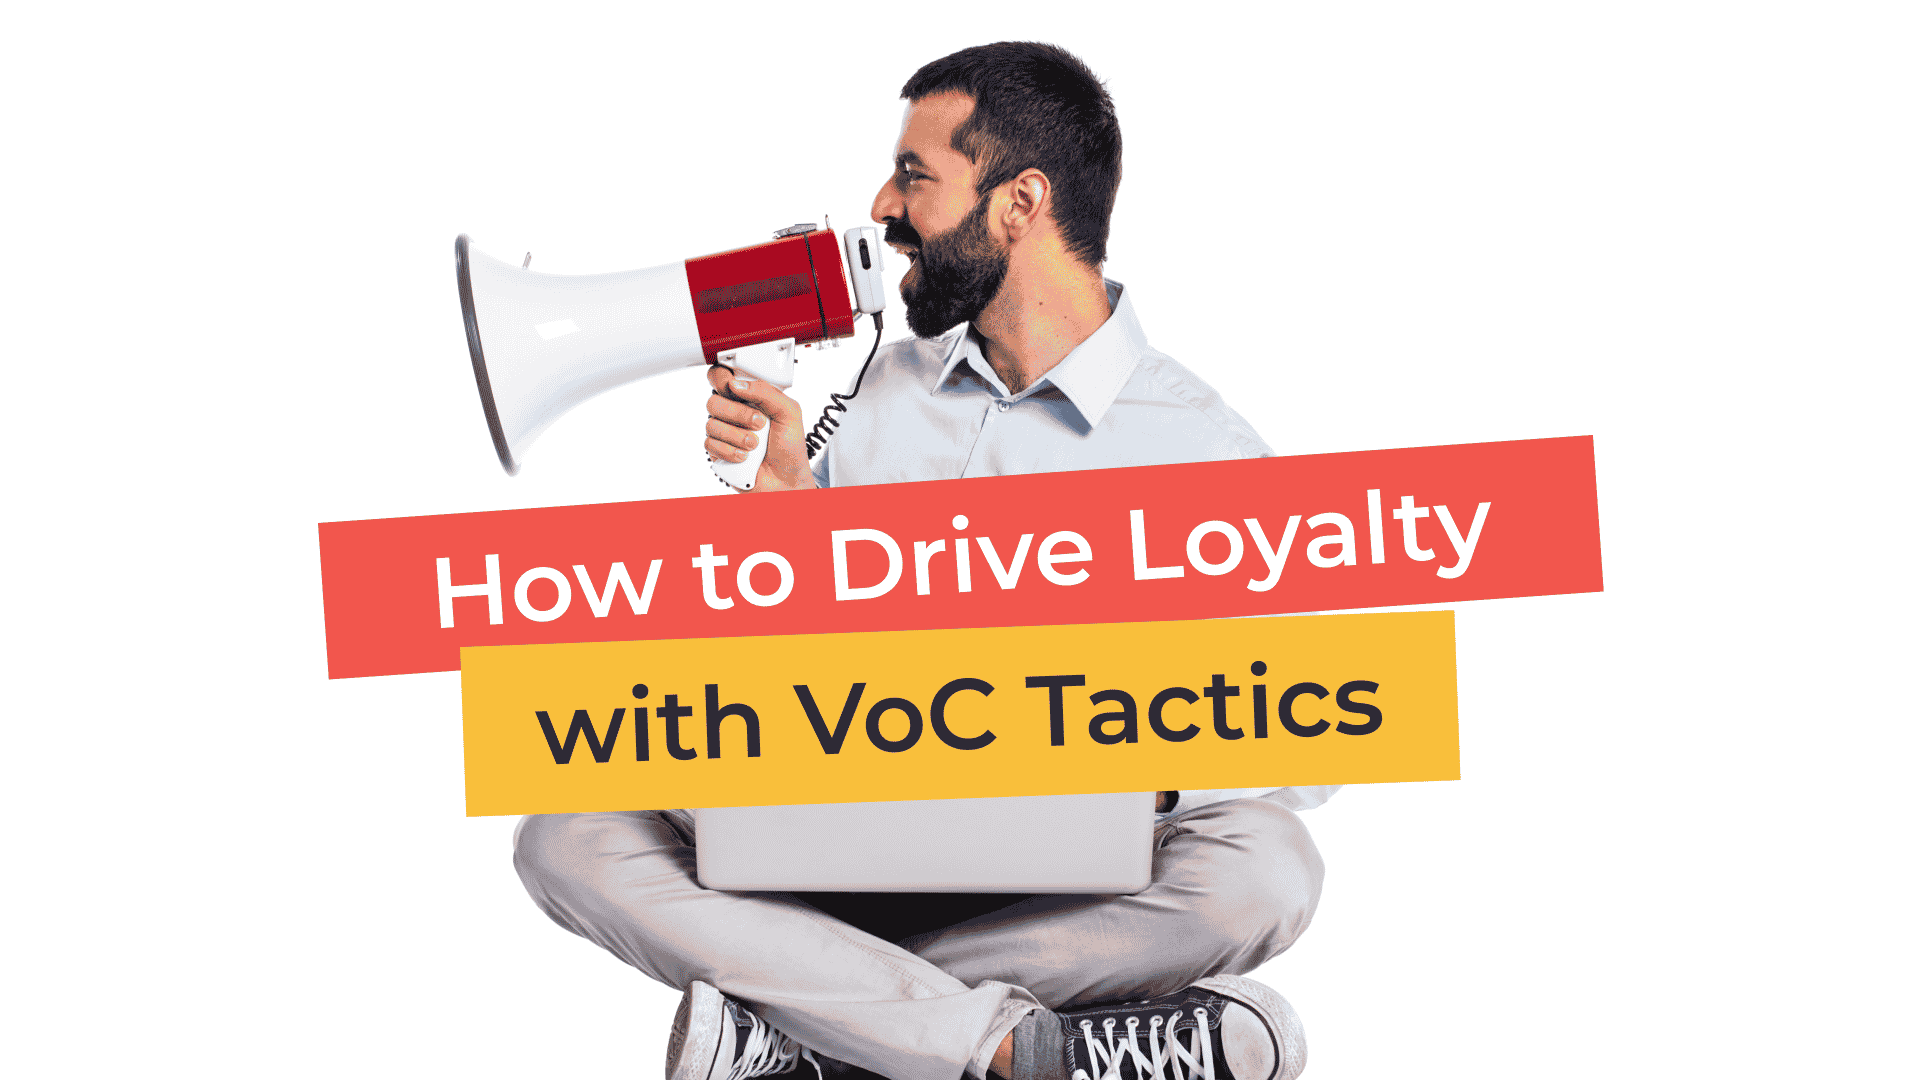 Using Voice of the Customer to Drive Loyalty